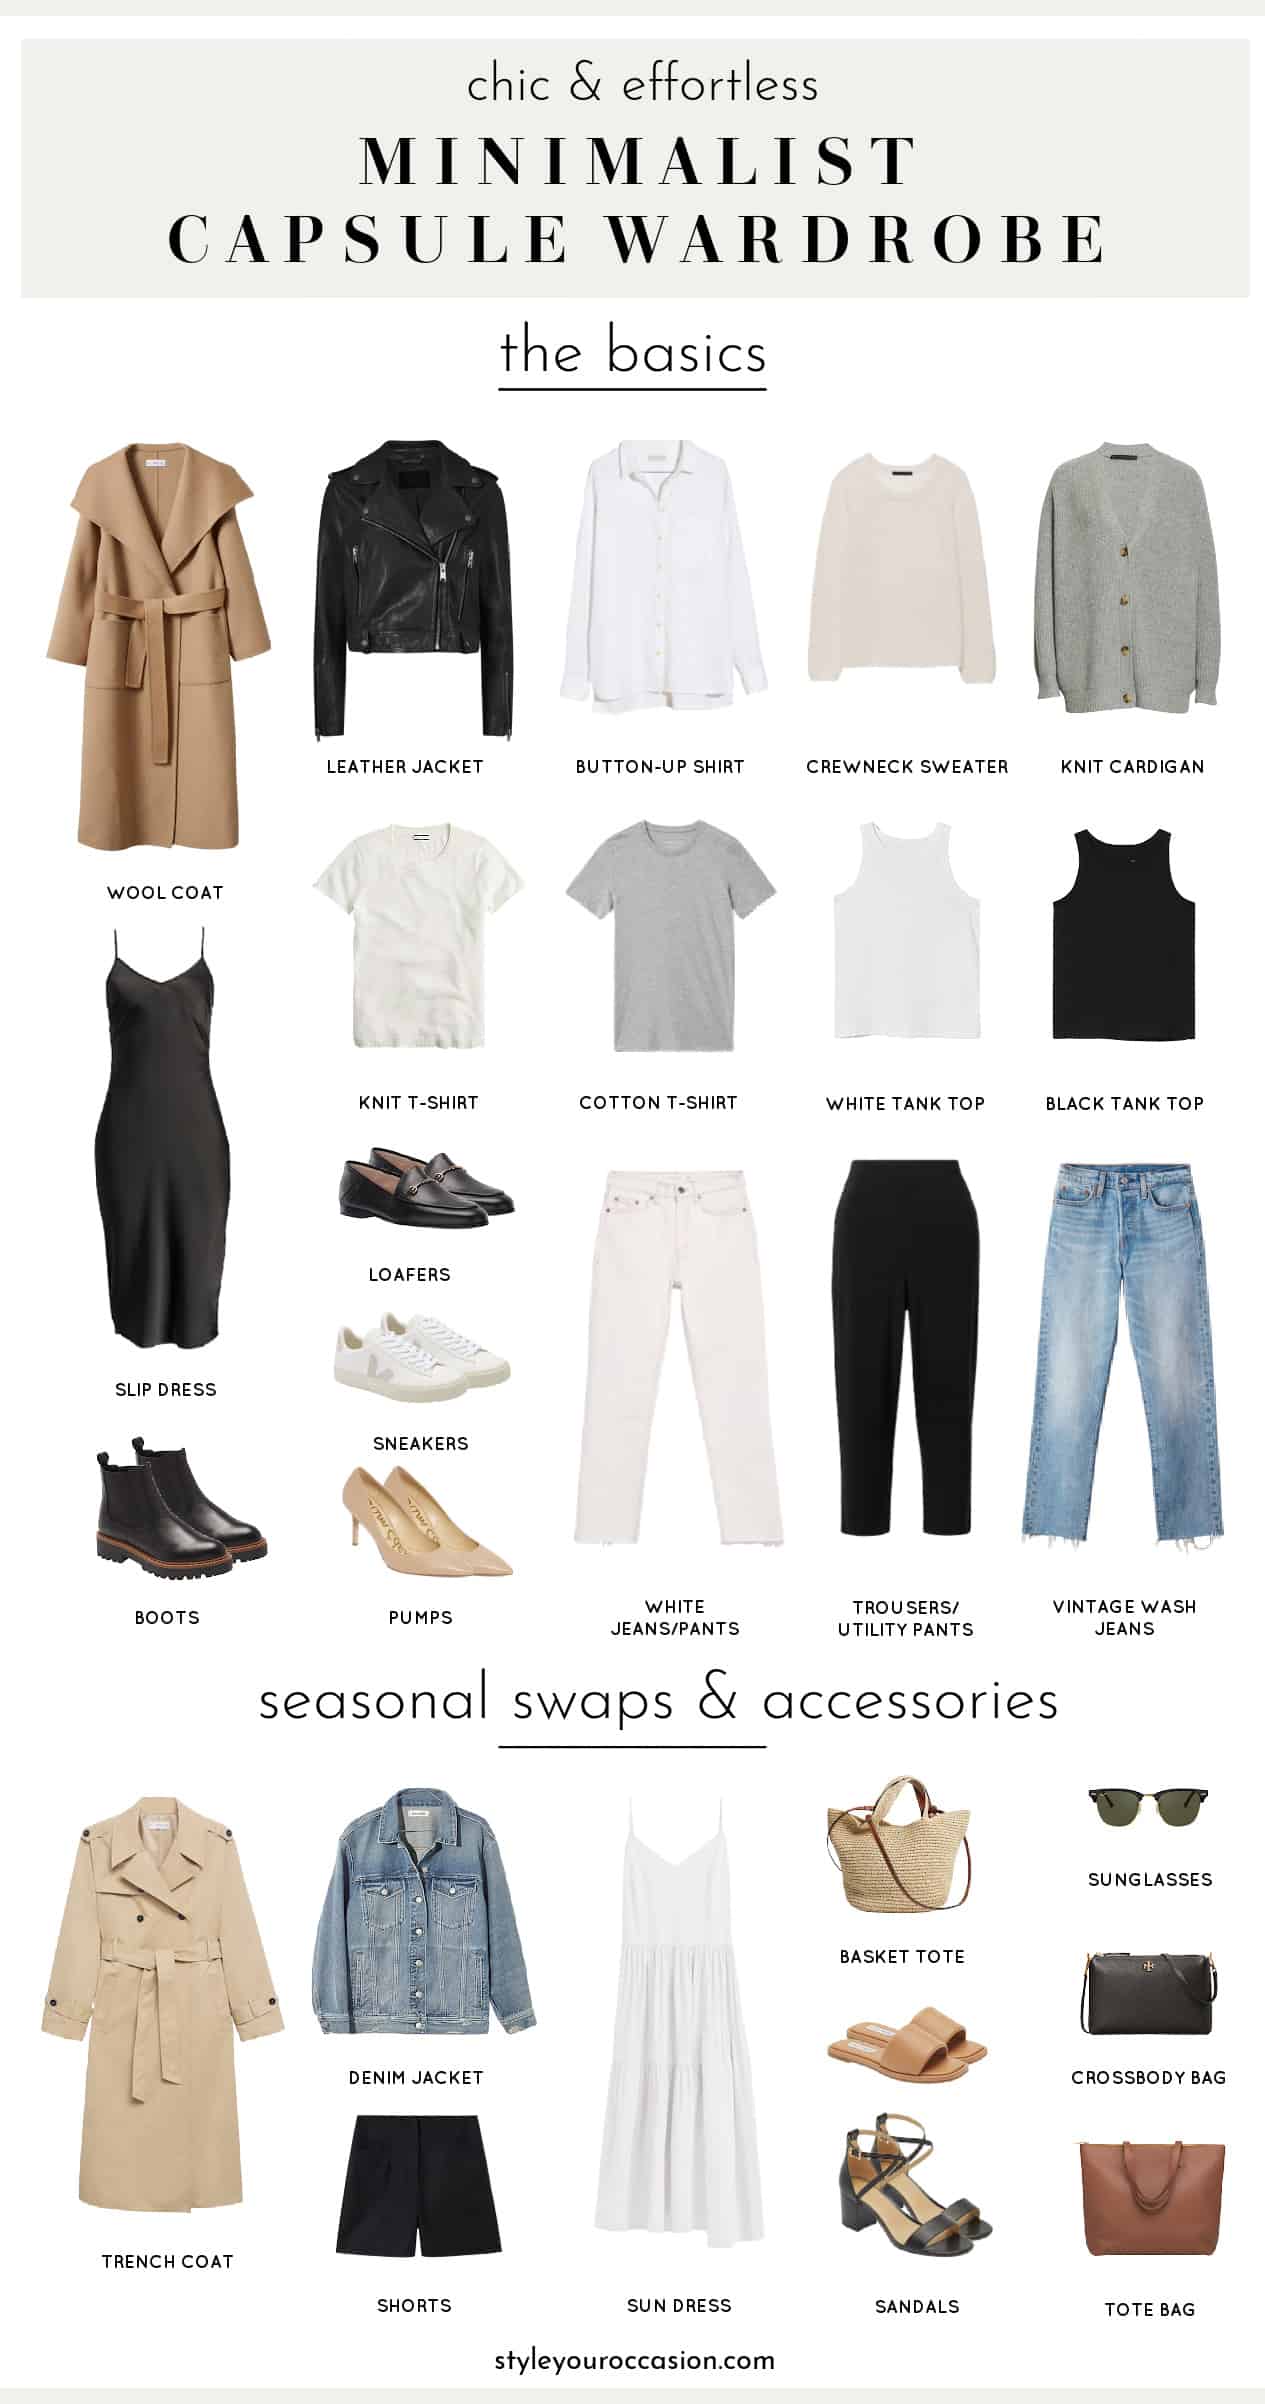 The French Minimalist Capsule Wardrobe Summer 2022 Collection ...